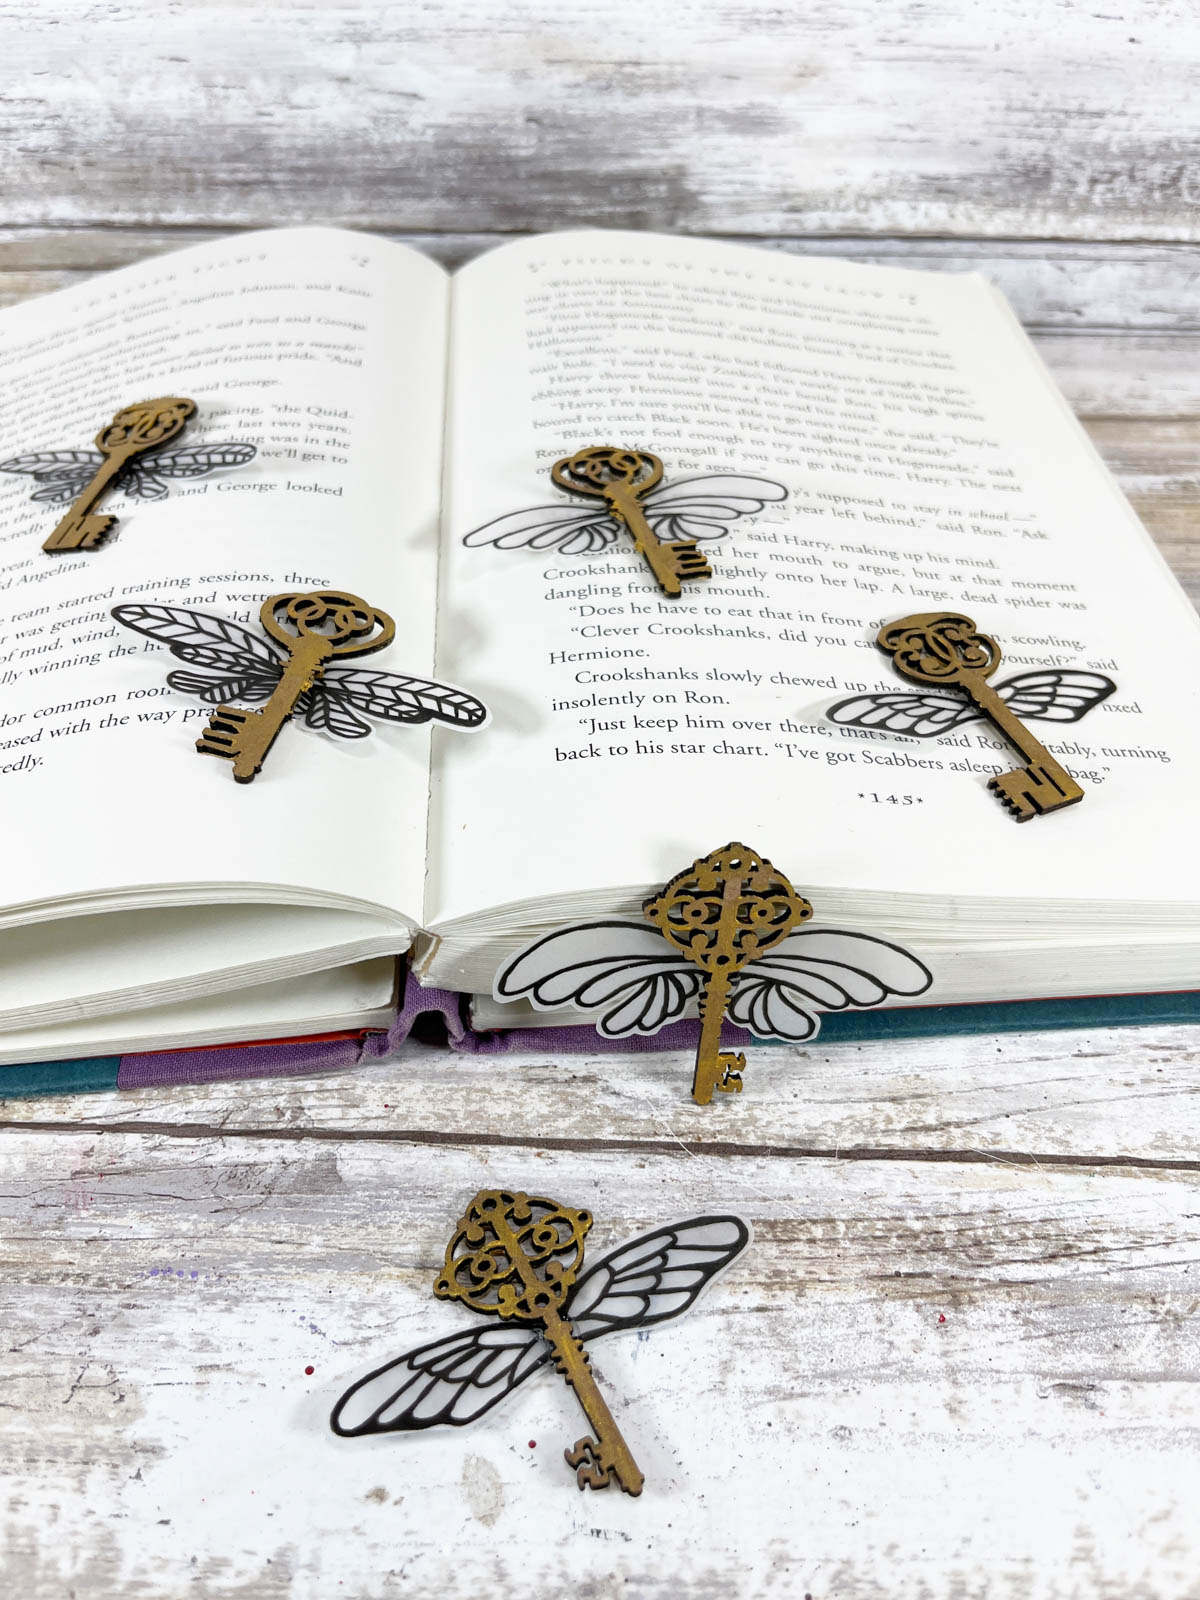 Harry Potter flying keys on a book with wooden background